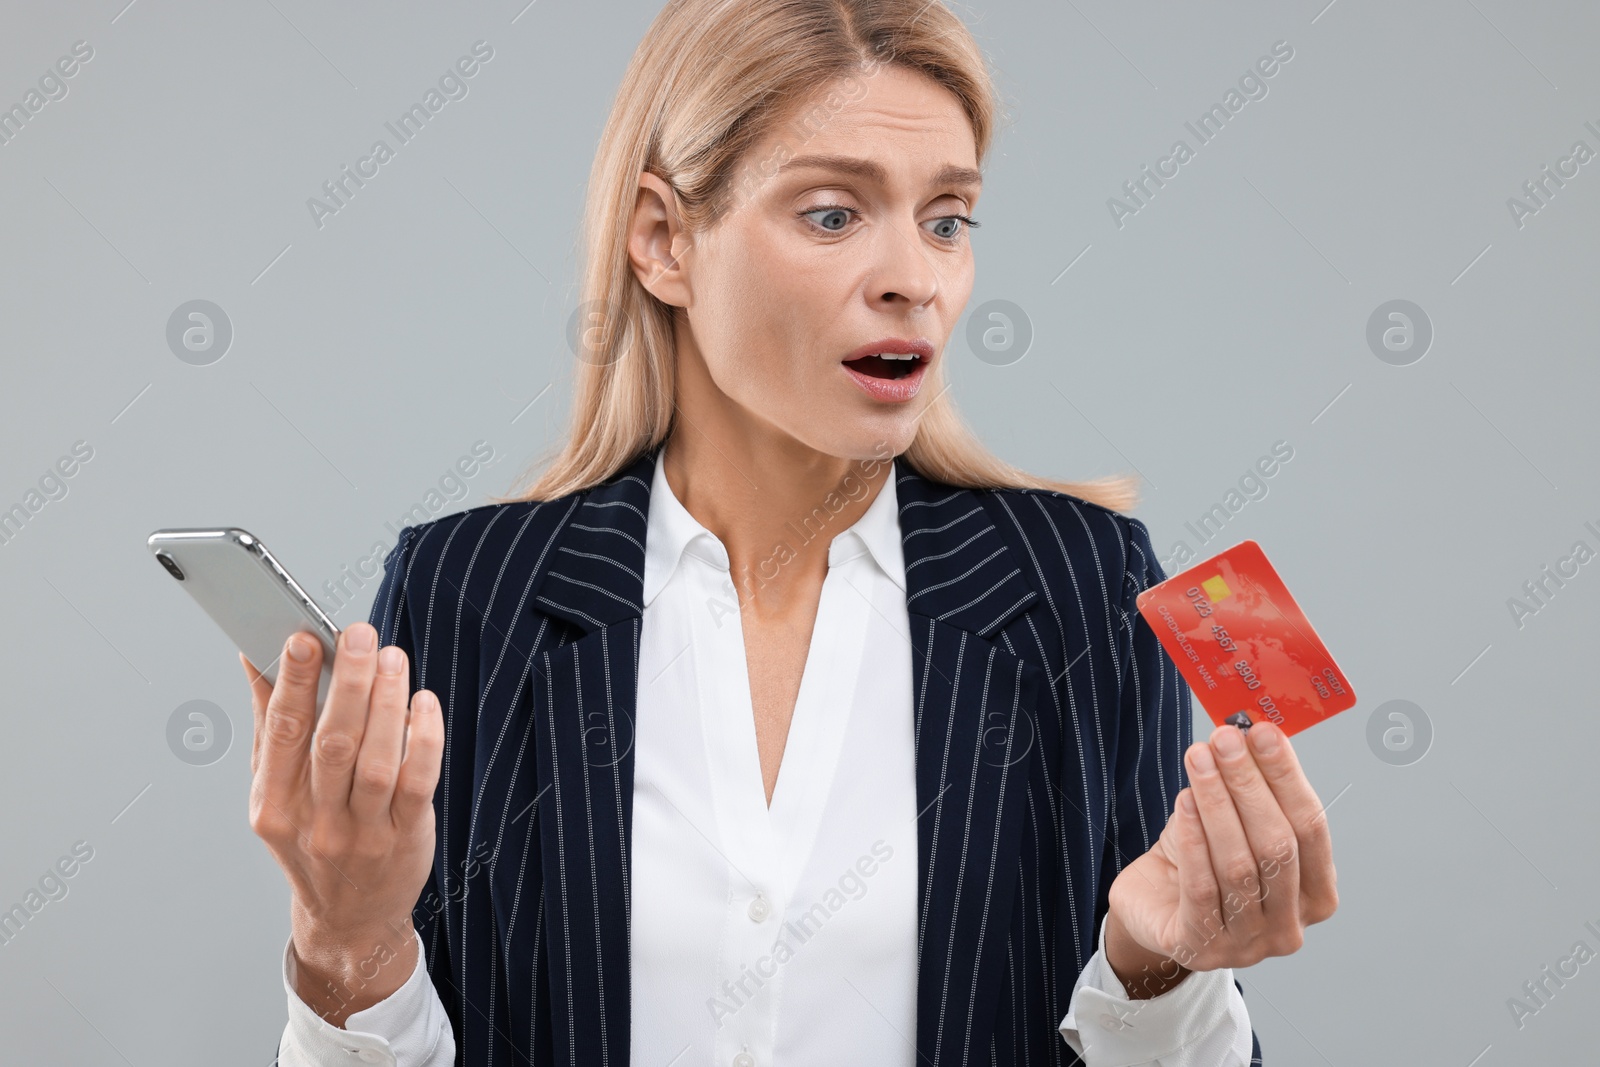 Photo of Stressed woman with credit card and smartphone on grey background. Be careful - fraud